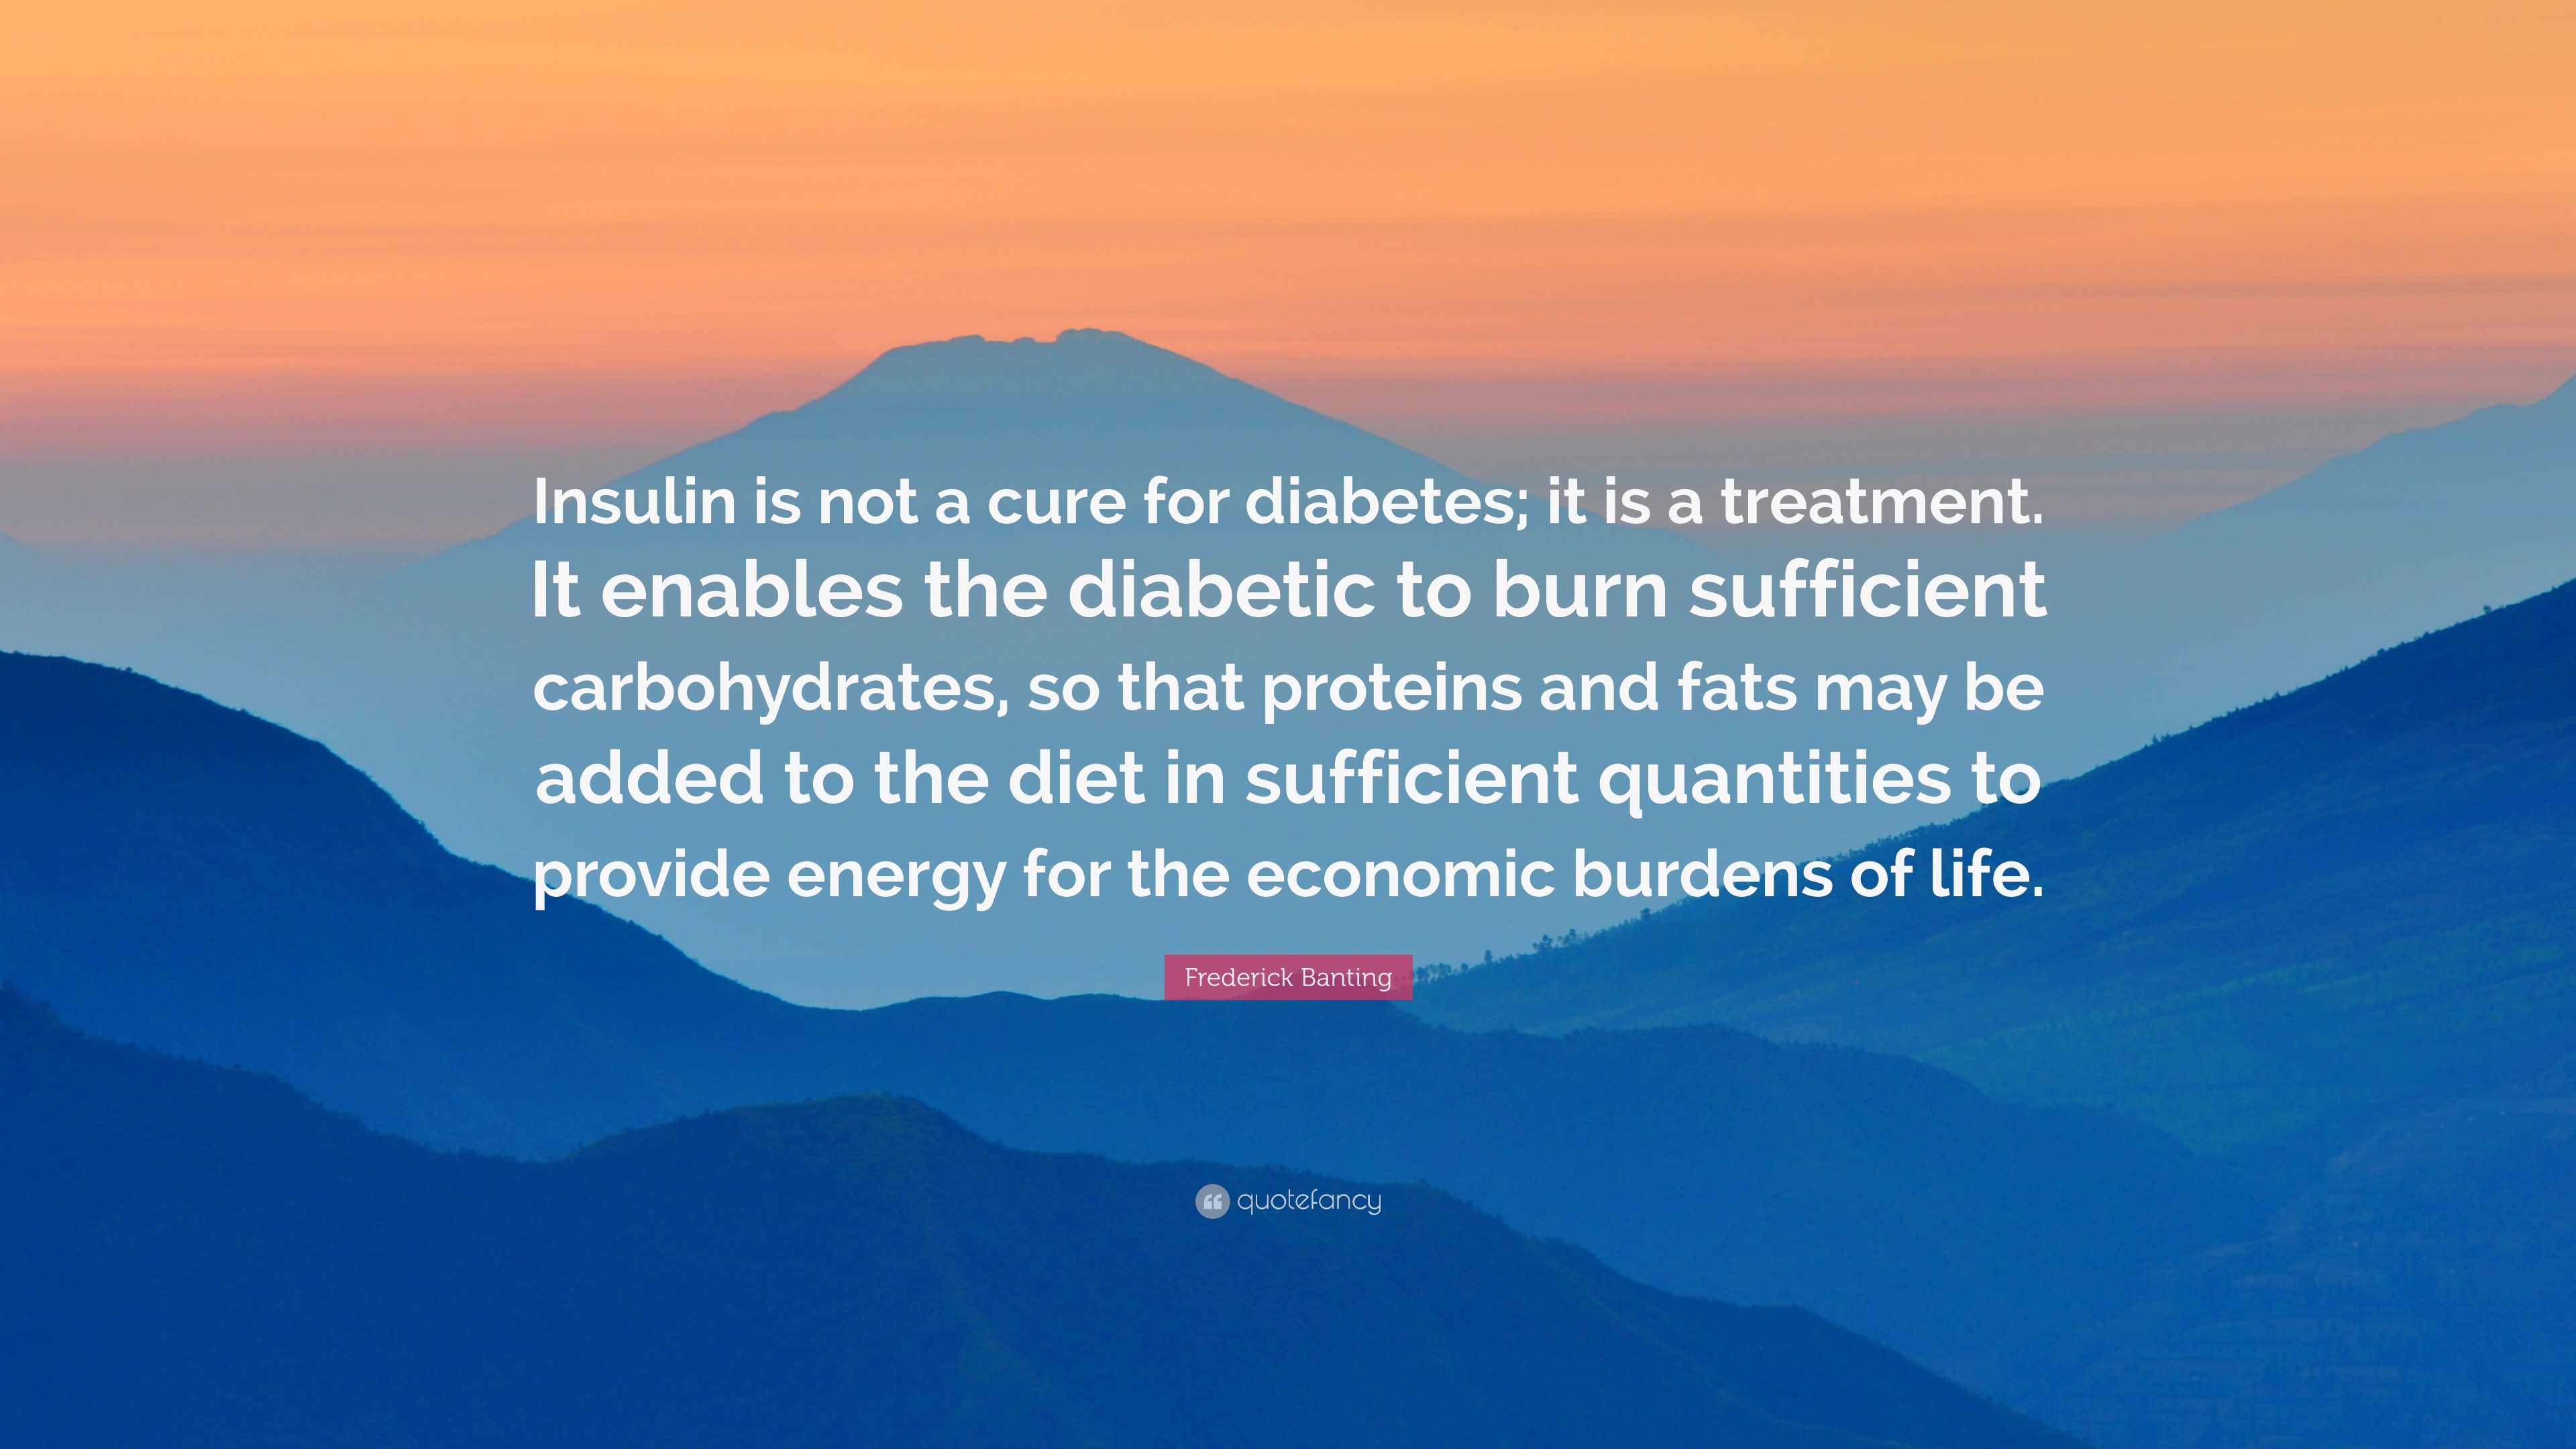 Frederick Banting Quote: “Insulin is not a cure for diabetes; it is